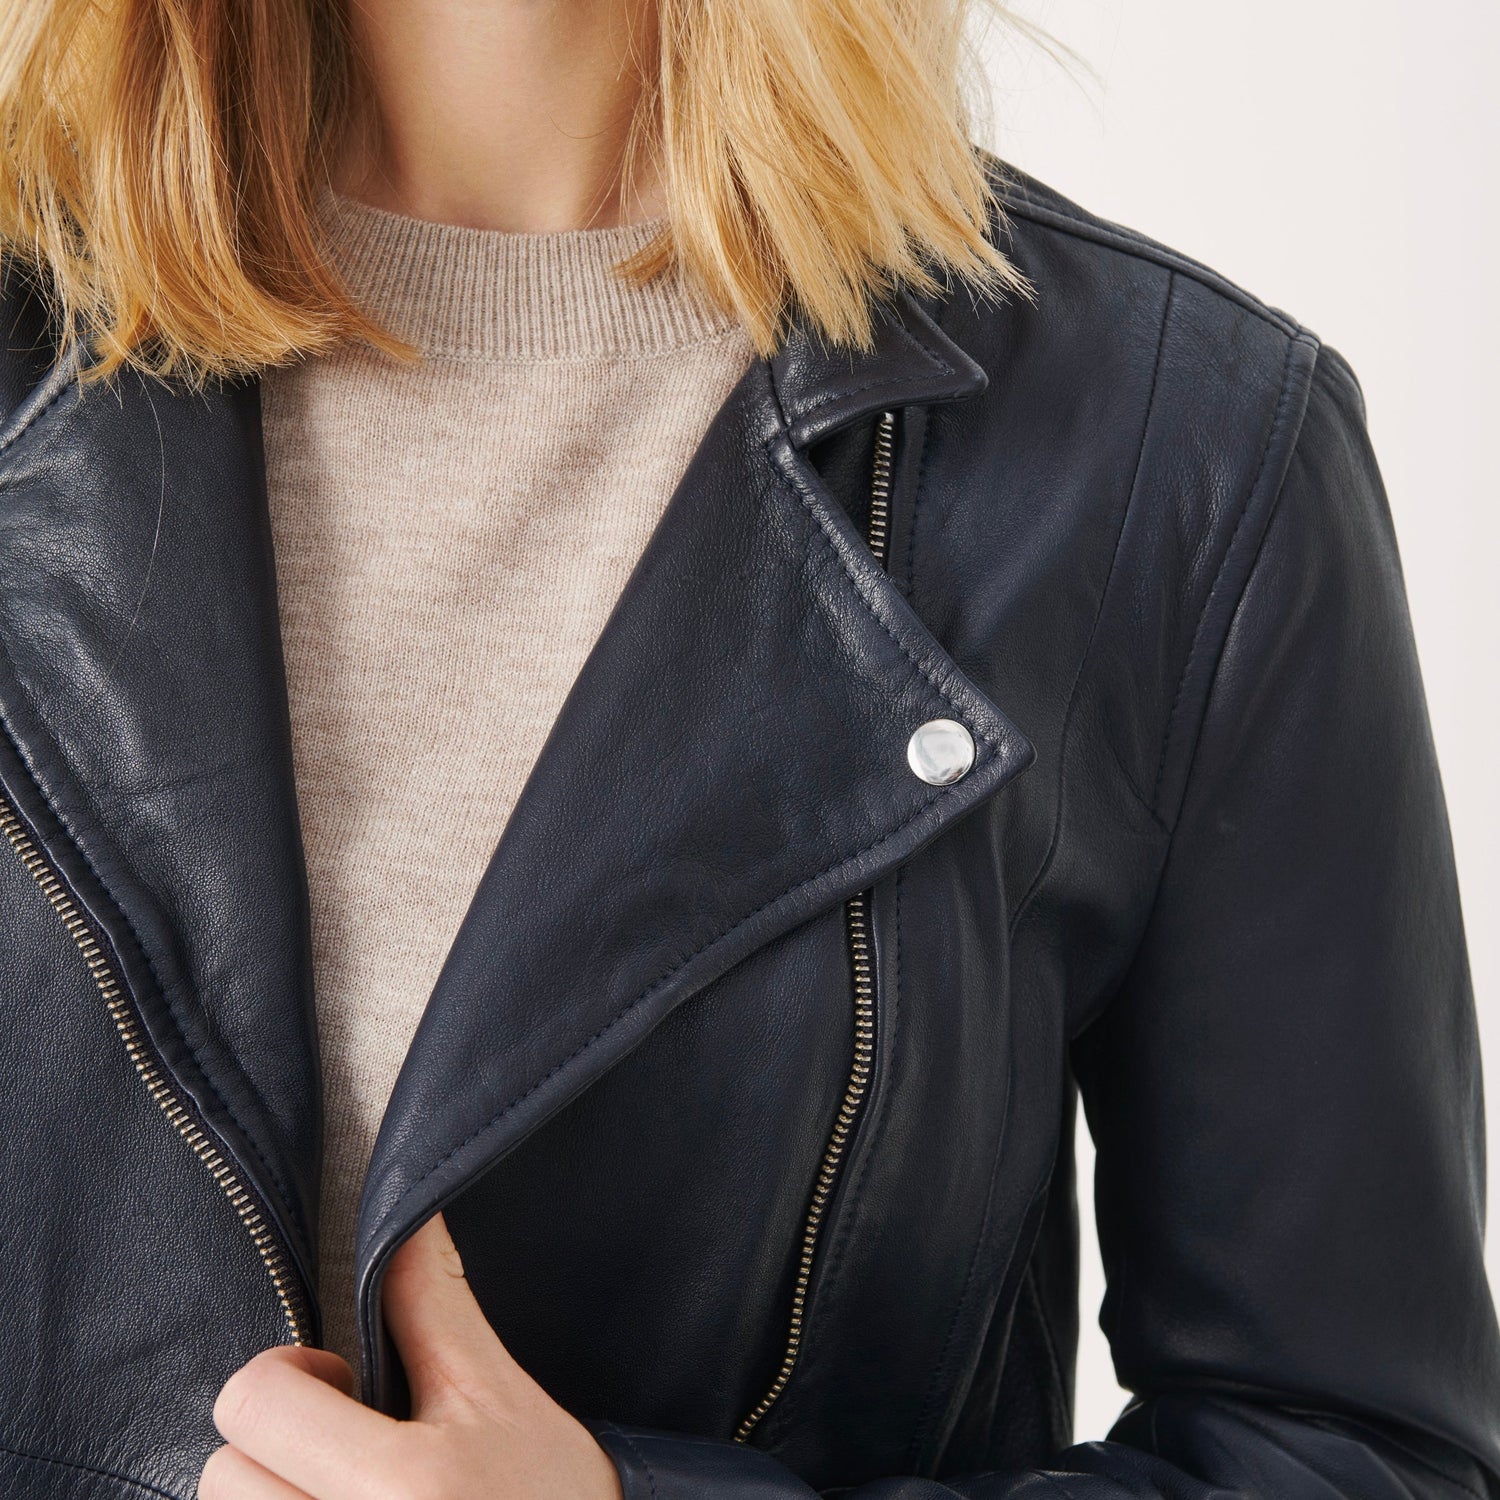 How to Care for Your Leather and Faux Leather